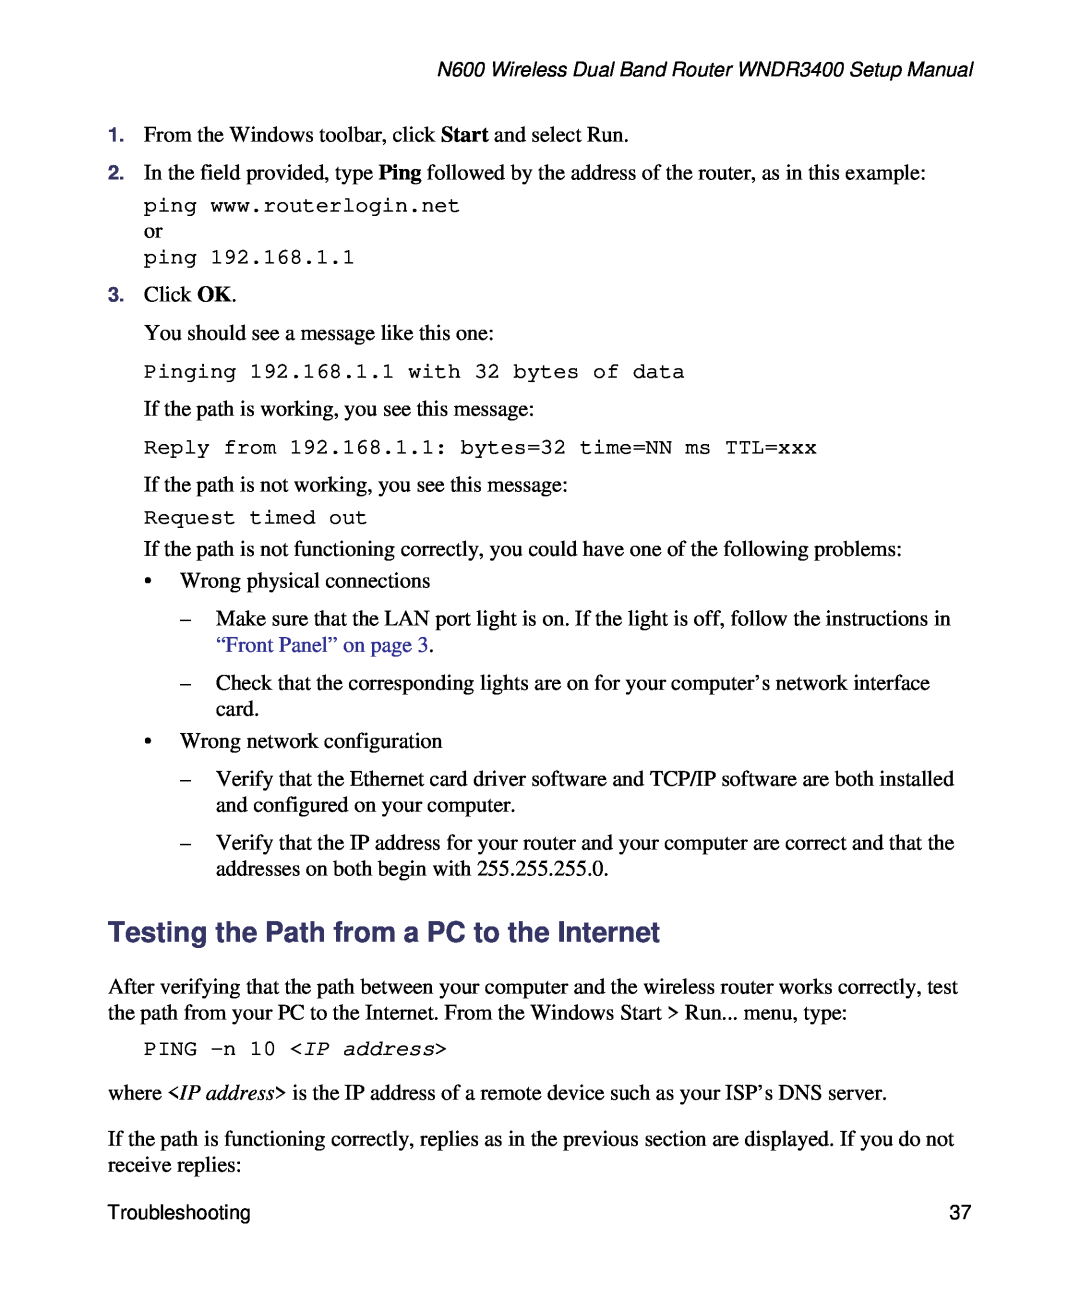 NETGEAR WNDR3400-100NAS manual Testing the Path from a PC to the Internet, PING -n 10 IP address 